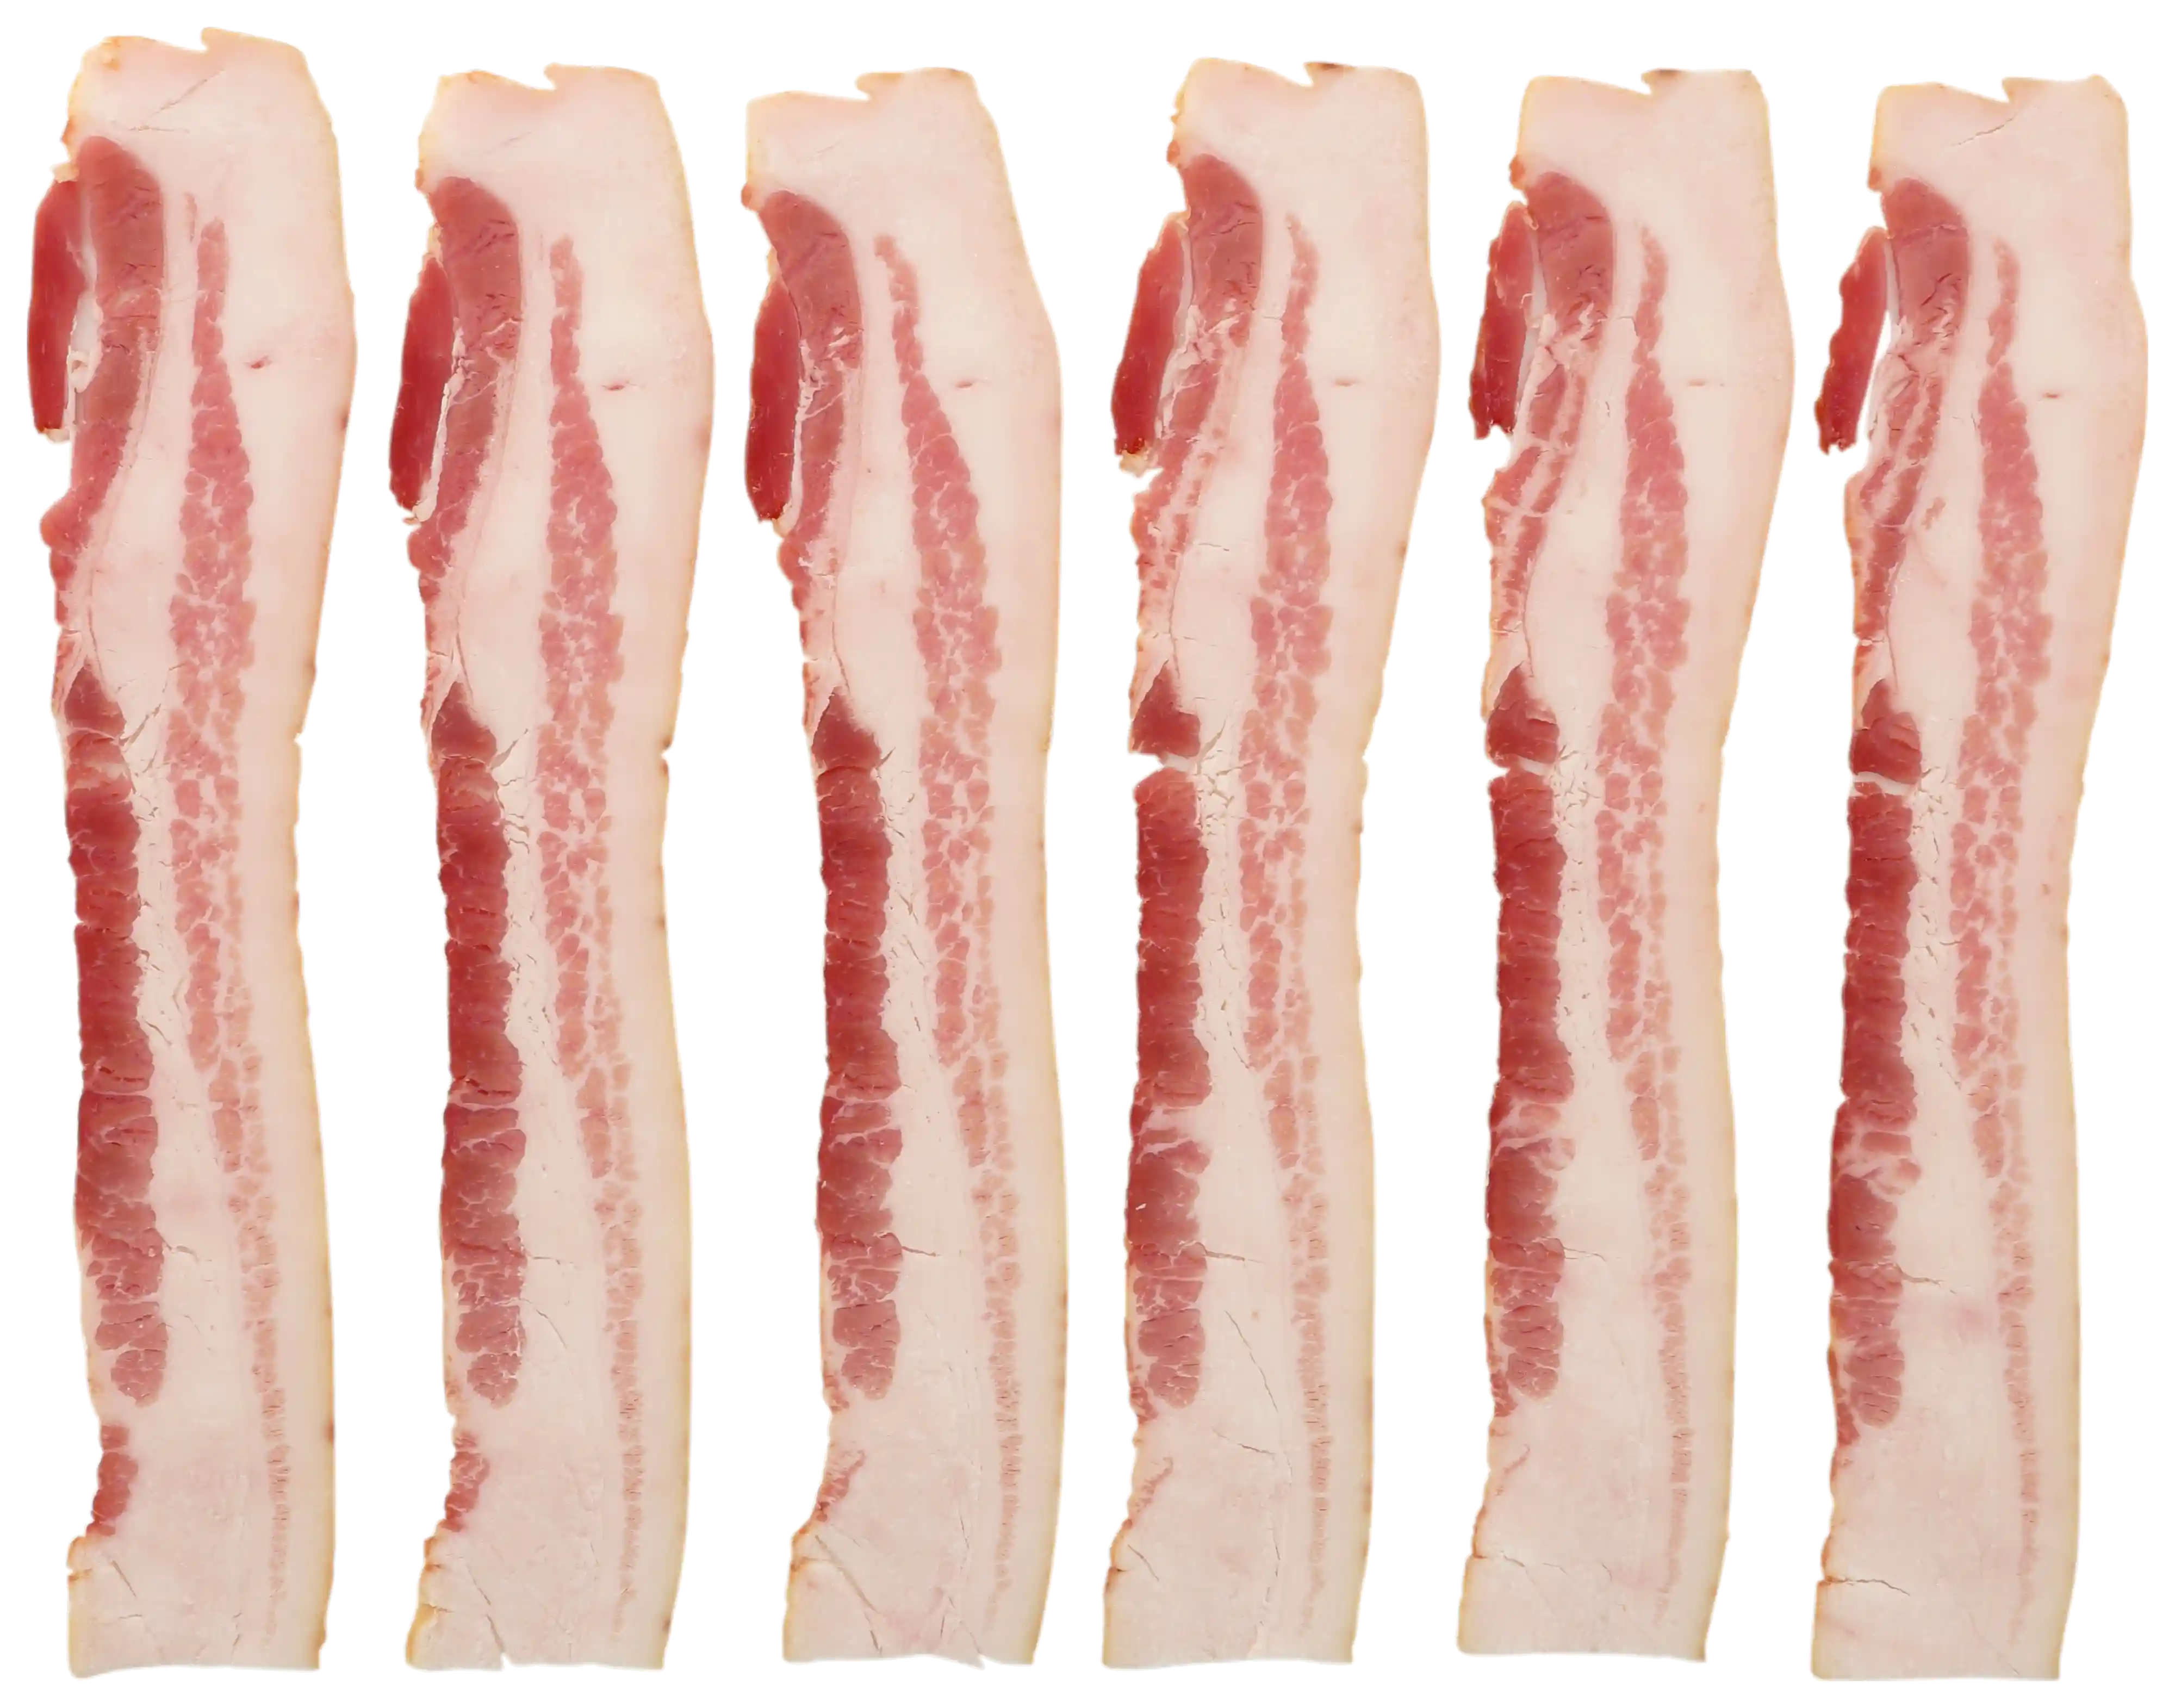 Wright® Brand Naturally Hickory Smoked Thin Sliced Bacon, Bulk, 15 Lbs, 18-22 Slices Per Pound, Gas Flushed_image_21